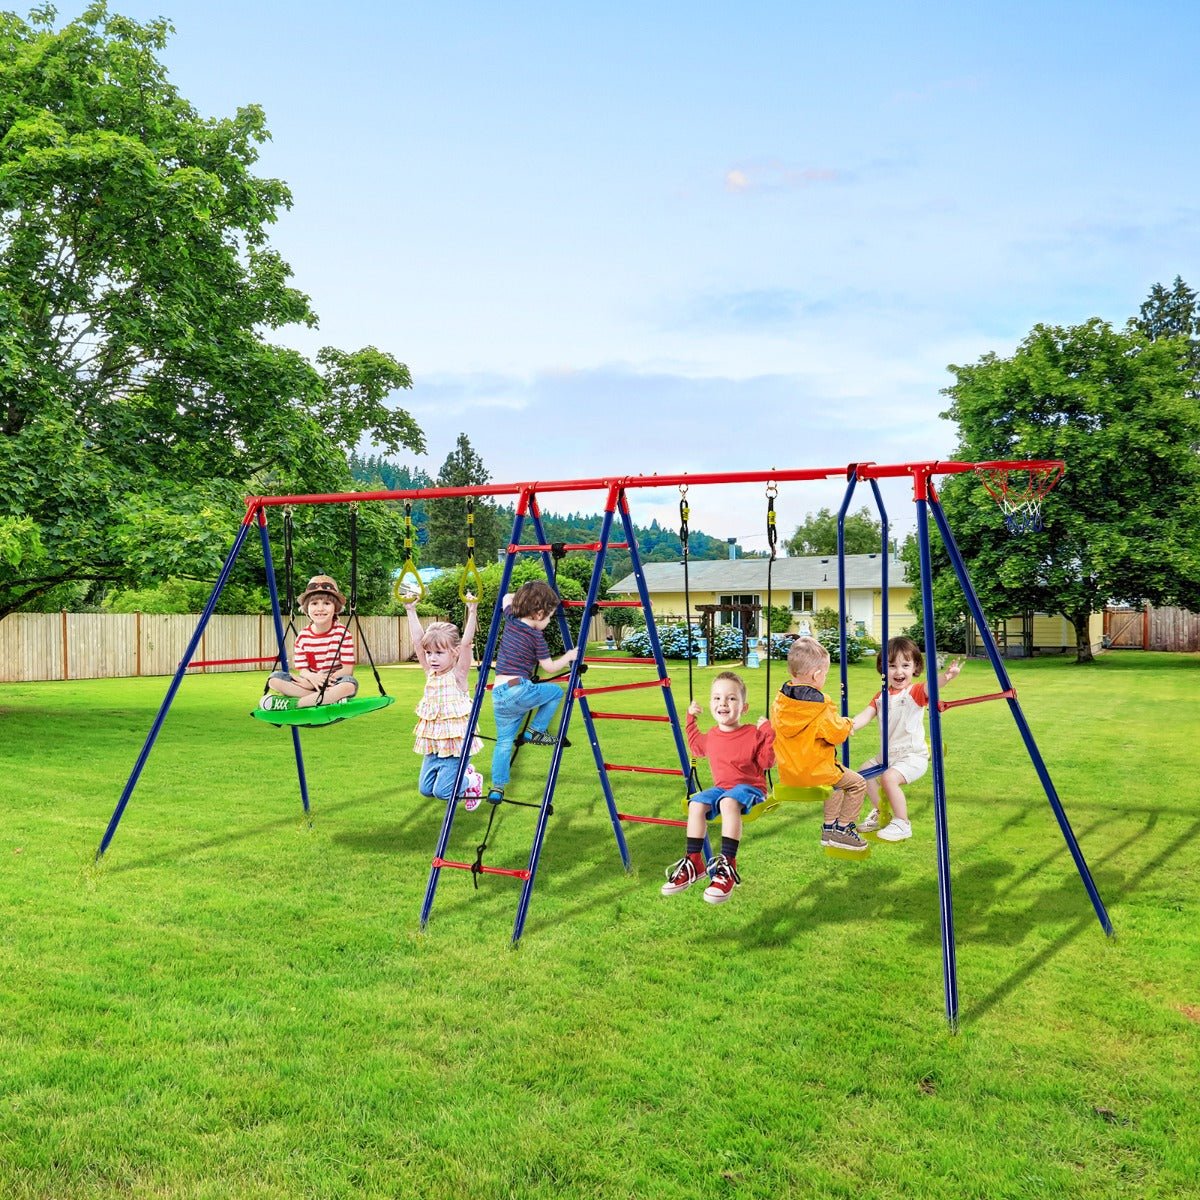 Swing Set with Climbing Ladder: Outdoor Joy and Adventure for Children